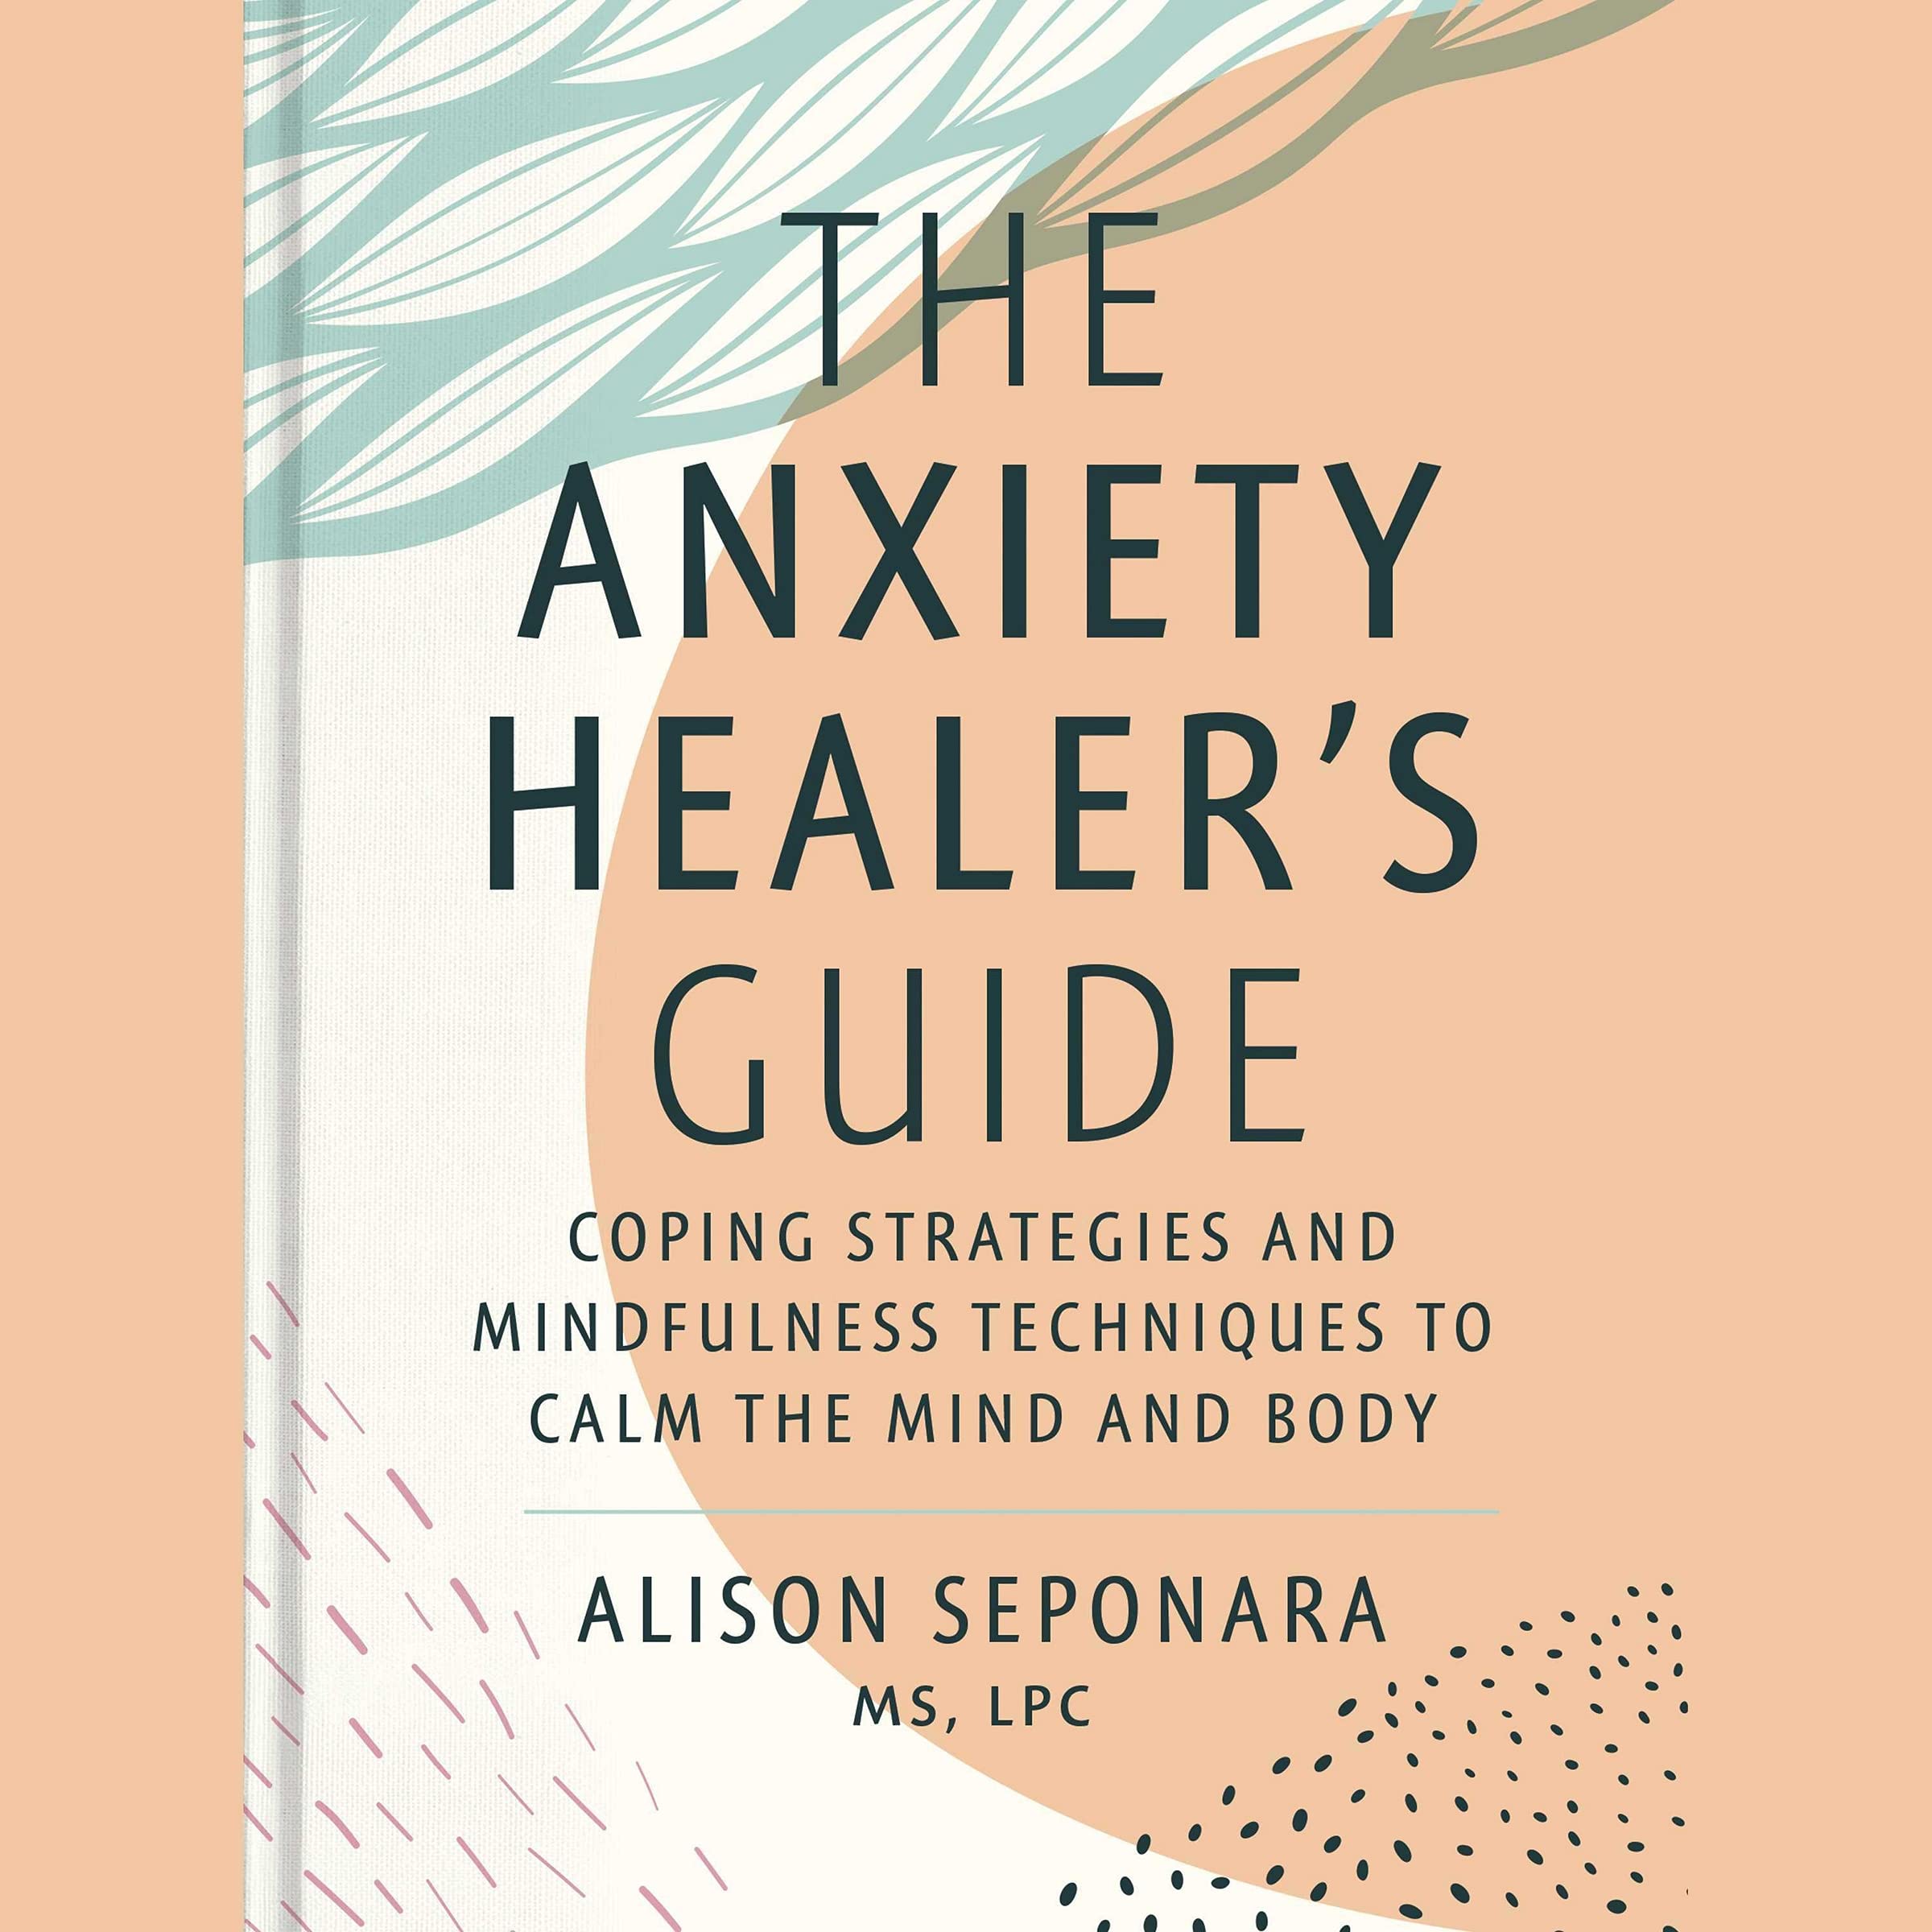 Image for "The Anxiety Healer's Guide"